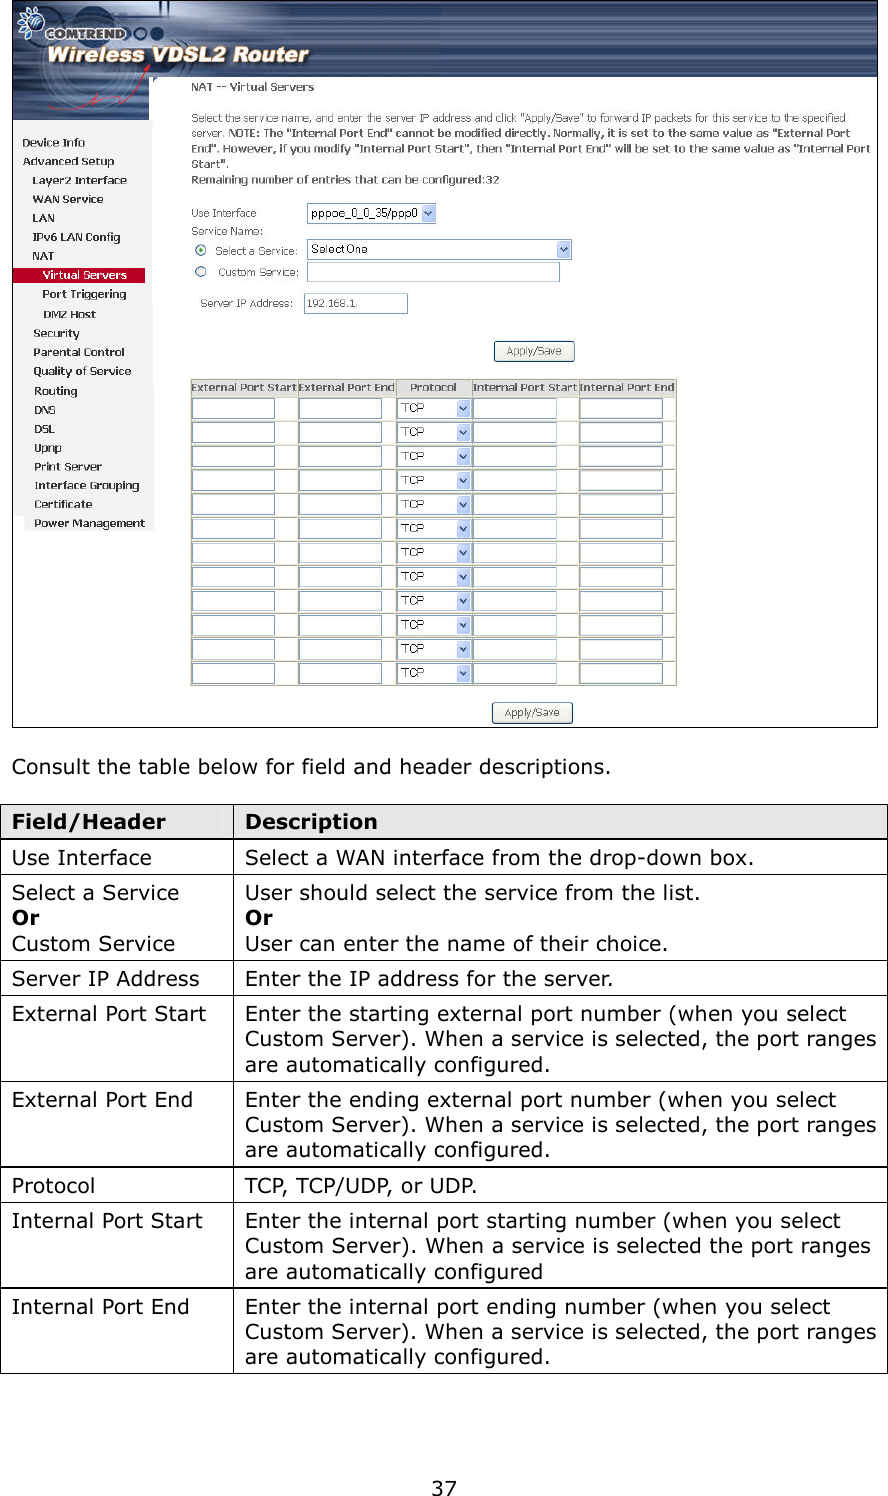   37   Consult the table below for field and header descriptions.  Field/Header  Description Use Interface  Select a WAN interface from the drop-down box. Select a Service Or   Custom Service User should select the service from the list. Or User can enter the name of their choice. Server IP Address  Enter the IP address for the server. External Port Start  Enter the starting external port number (when you select Custom Server). When a service is selected, the port ranges are automatically configured. External Port End  Enter the ending external port number (when you select Custom Server). When a service is selected, the port ranges are automatically configured. Protocol  TCP, TCP/UDP, or UDP. Internal Port Start  Enter the internal port starting number (when you select Custom Server). When a service is selected the port ranges are automatically configured Internal Port End  Enter the internal port ending number (when you select Custom Server). When a service is selected, the port ranges are automatically configured. 